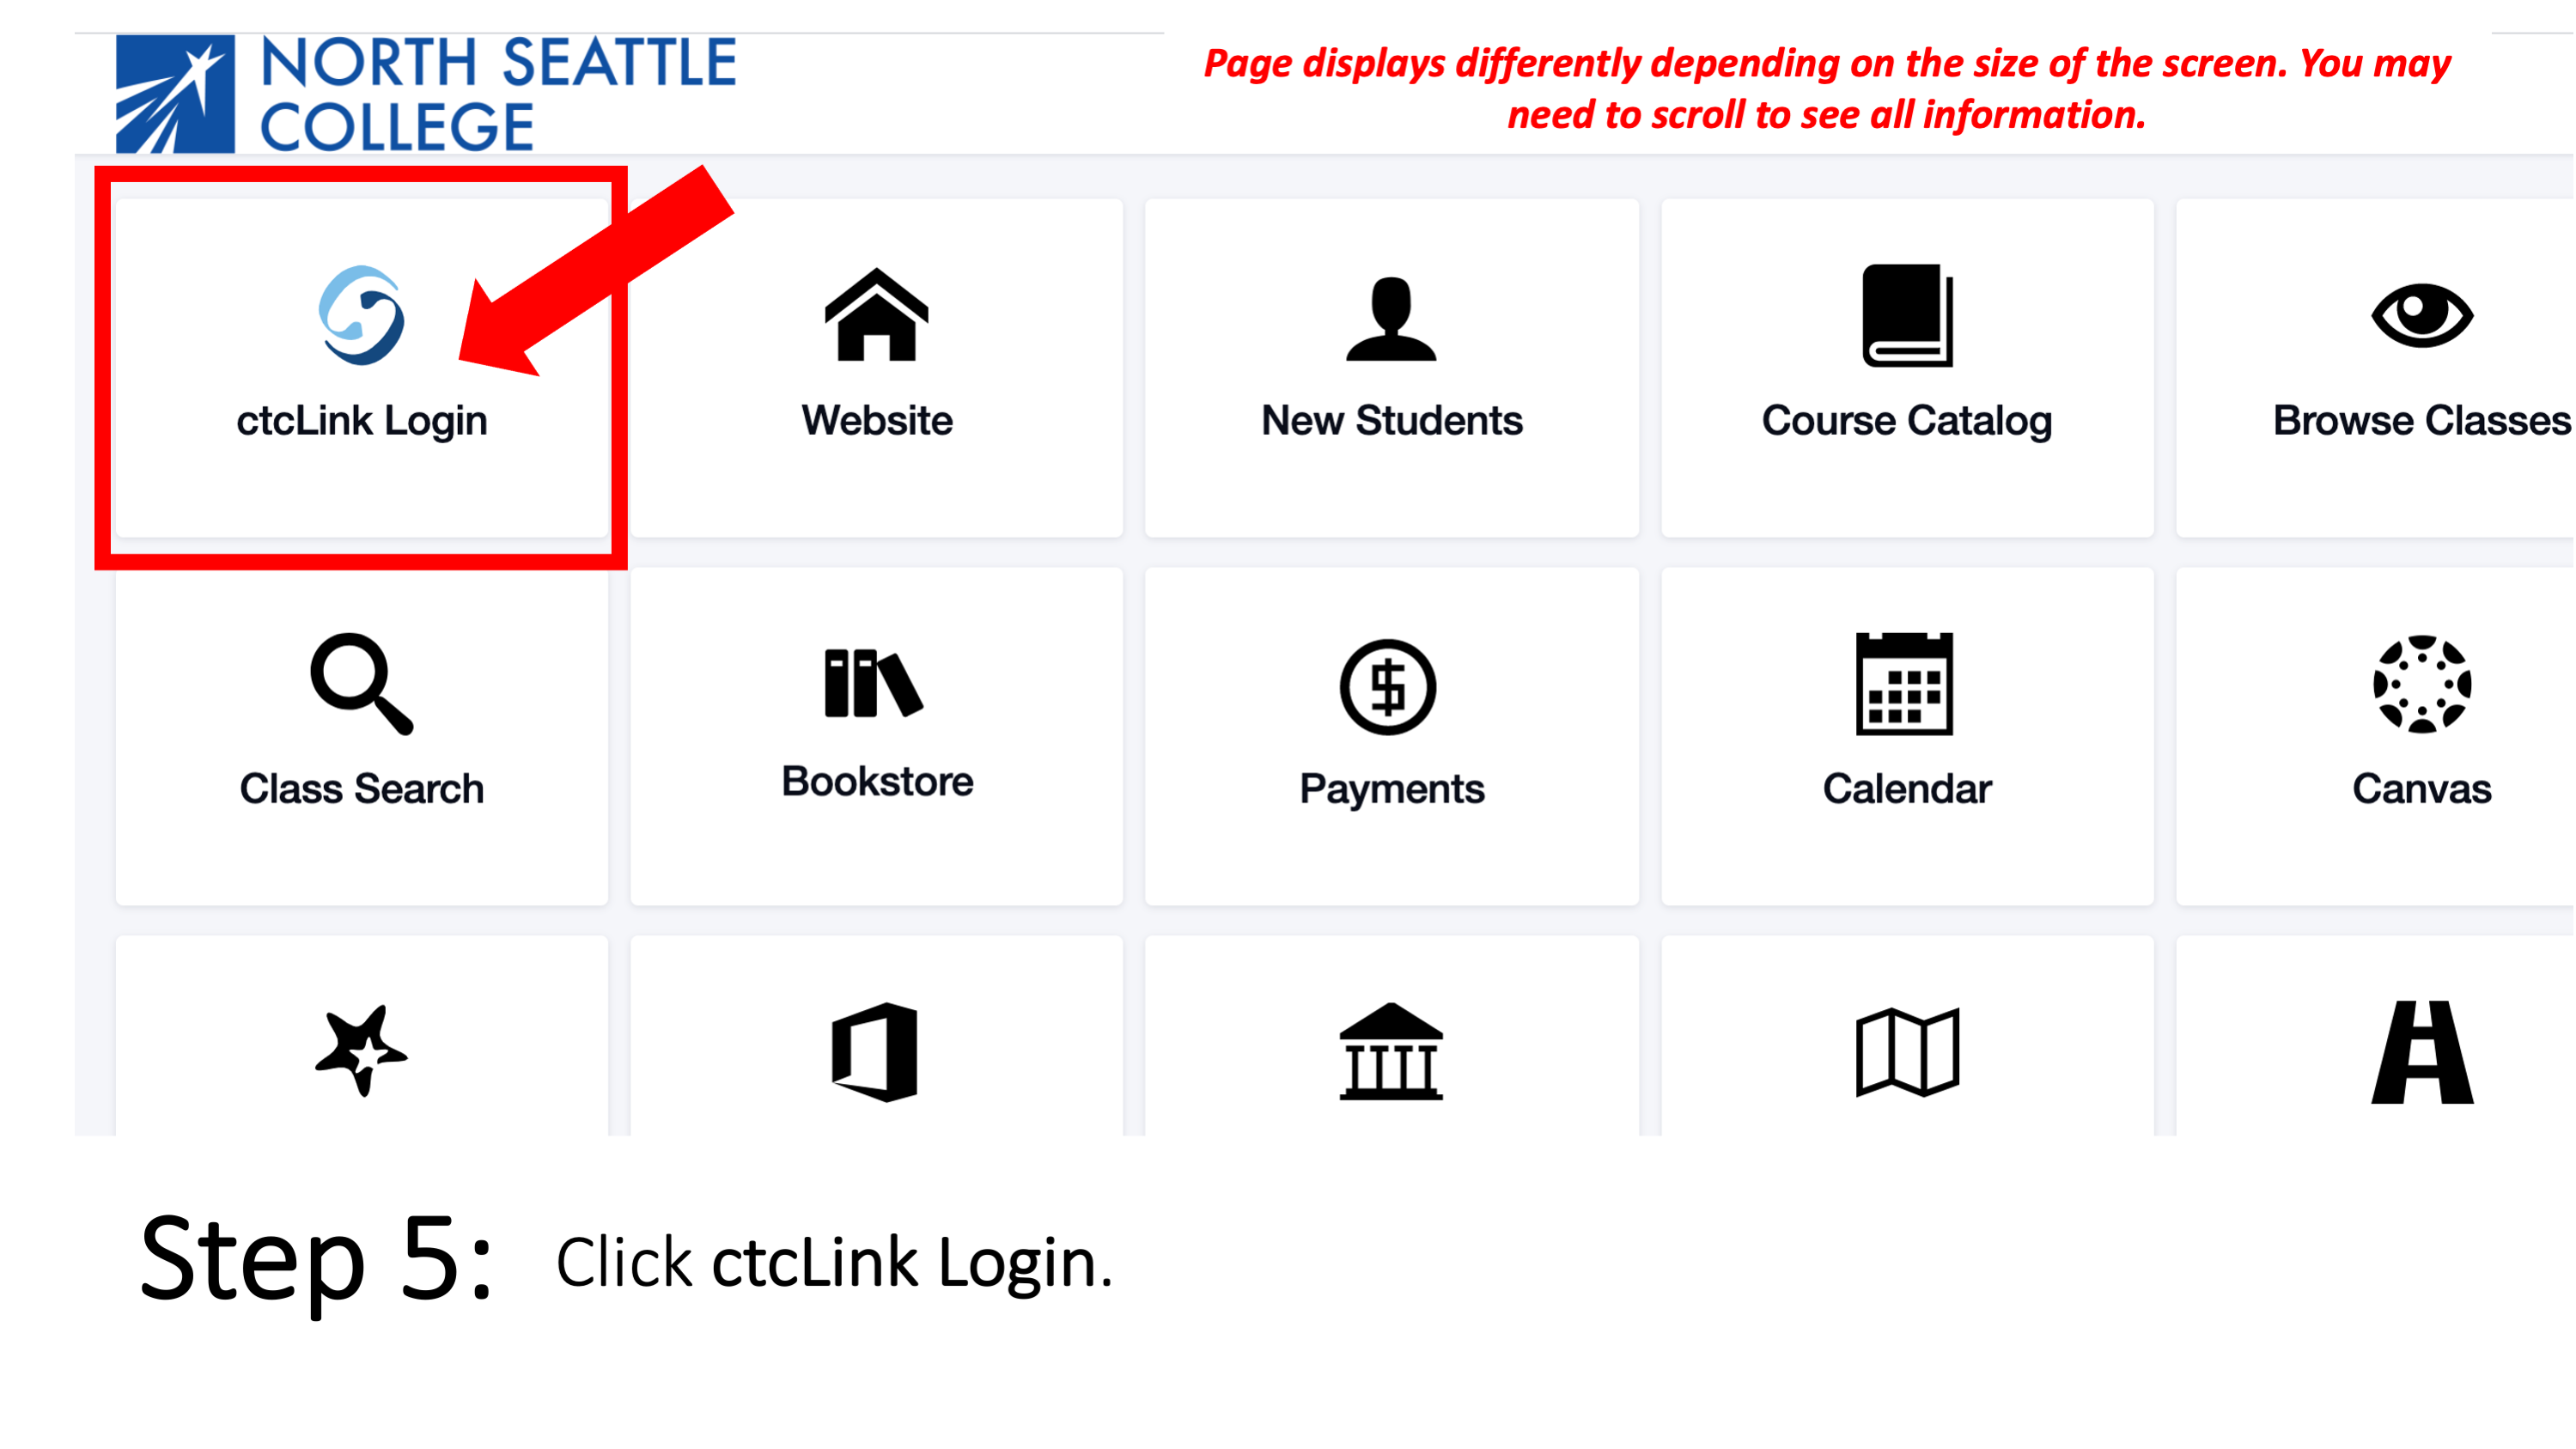 Step 5: Click on ctcLink Login. Page displays differently depending on the size of the screen. You may need to scroll to see all information.